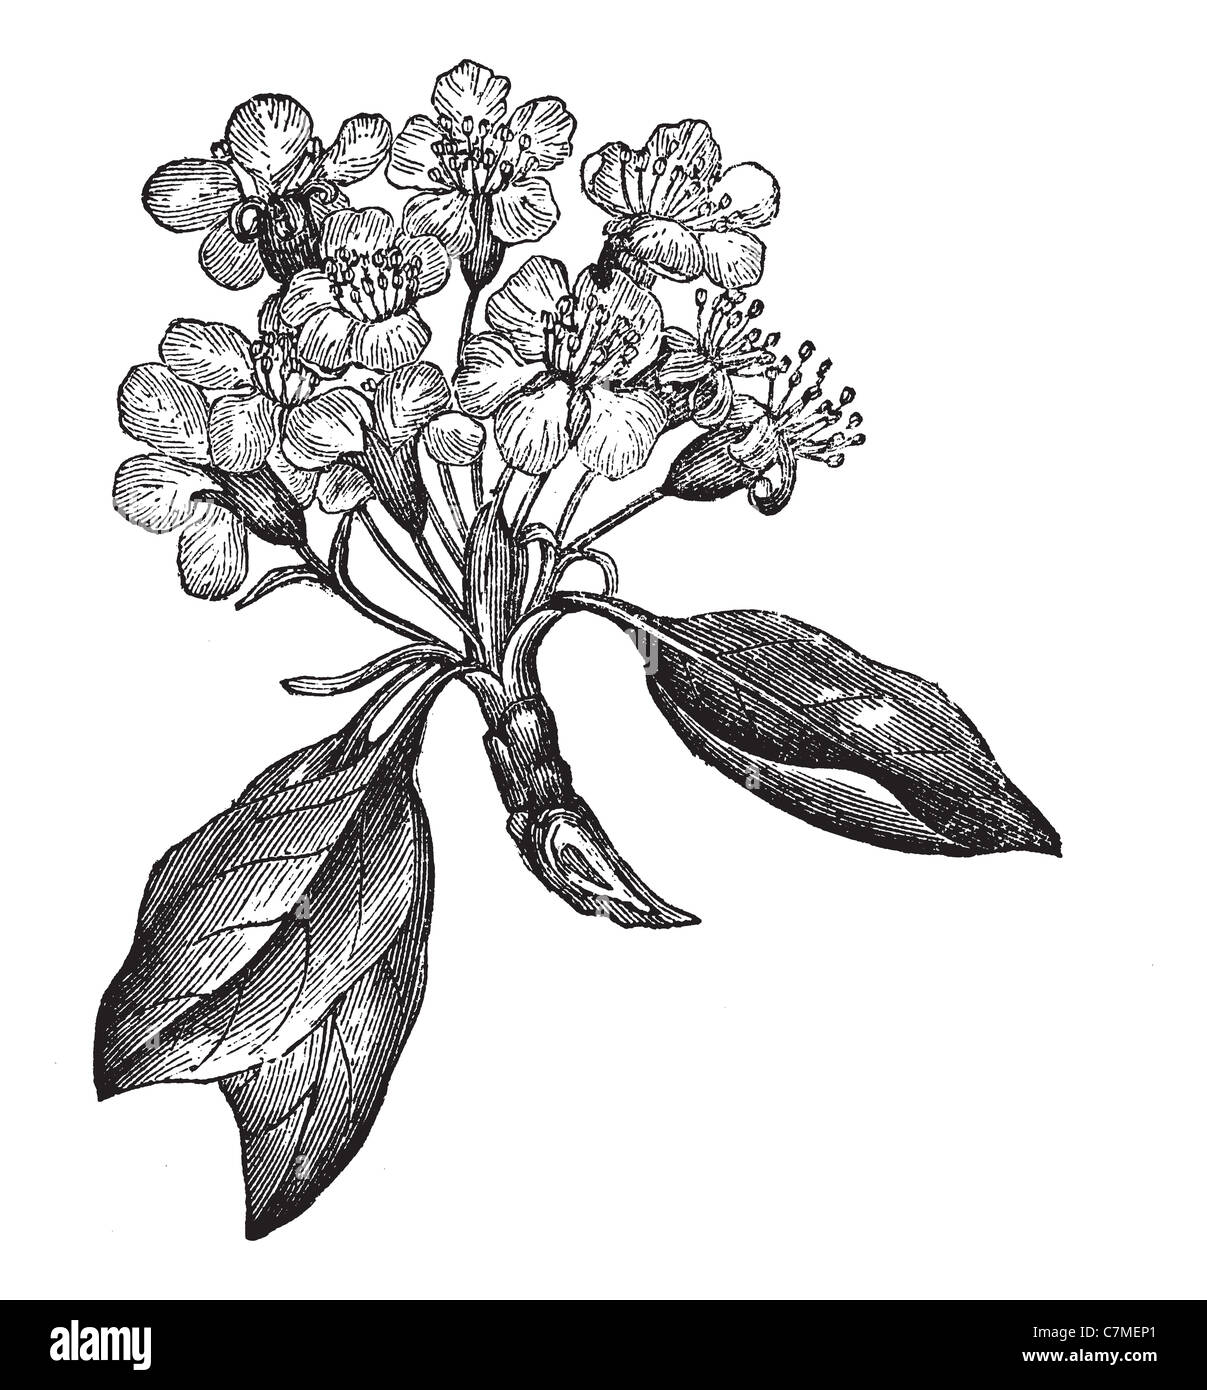 Pear or Pyrus sp., vintage engraved illustration, showing flowers (left) and fruit (right). Trousset encyclopedia (1886 - 1891). Stock Photo